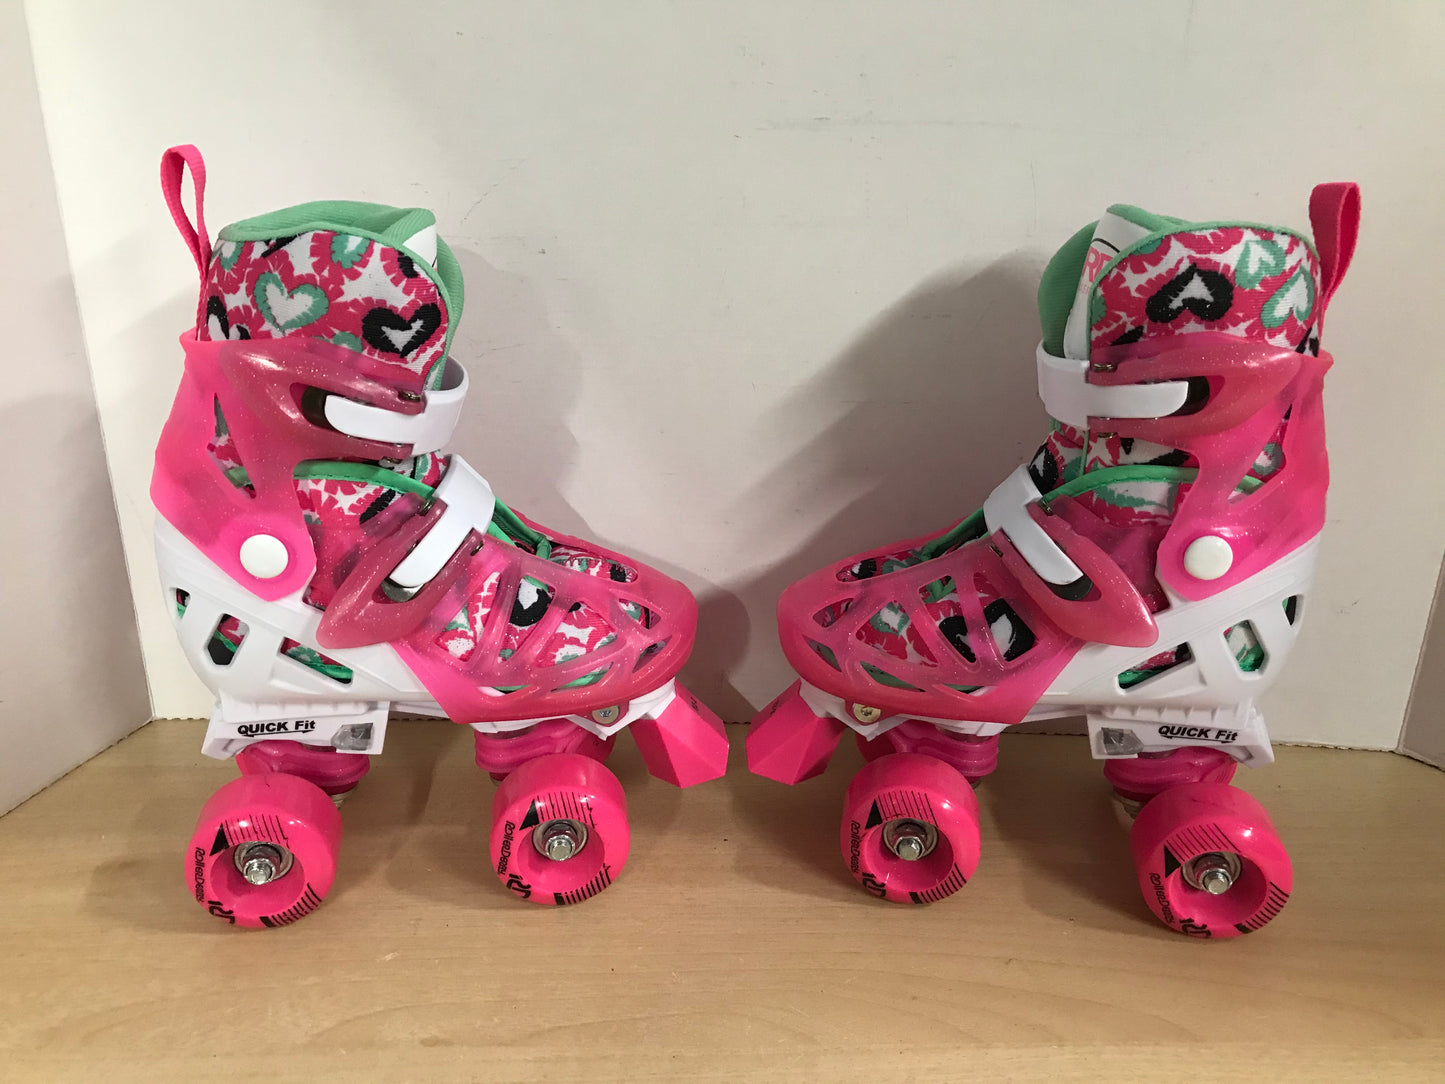 Inline Roller Skates Derby 4 Wheels Child Size 12-2 Adjustable  Rubber Wheels Pink White Apple Green As New Excellent